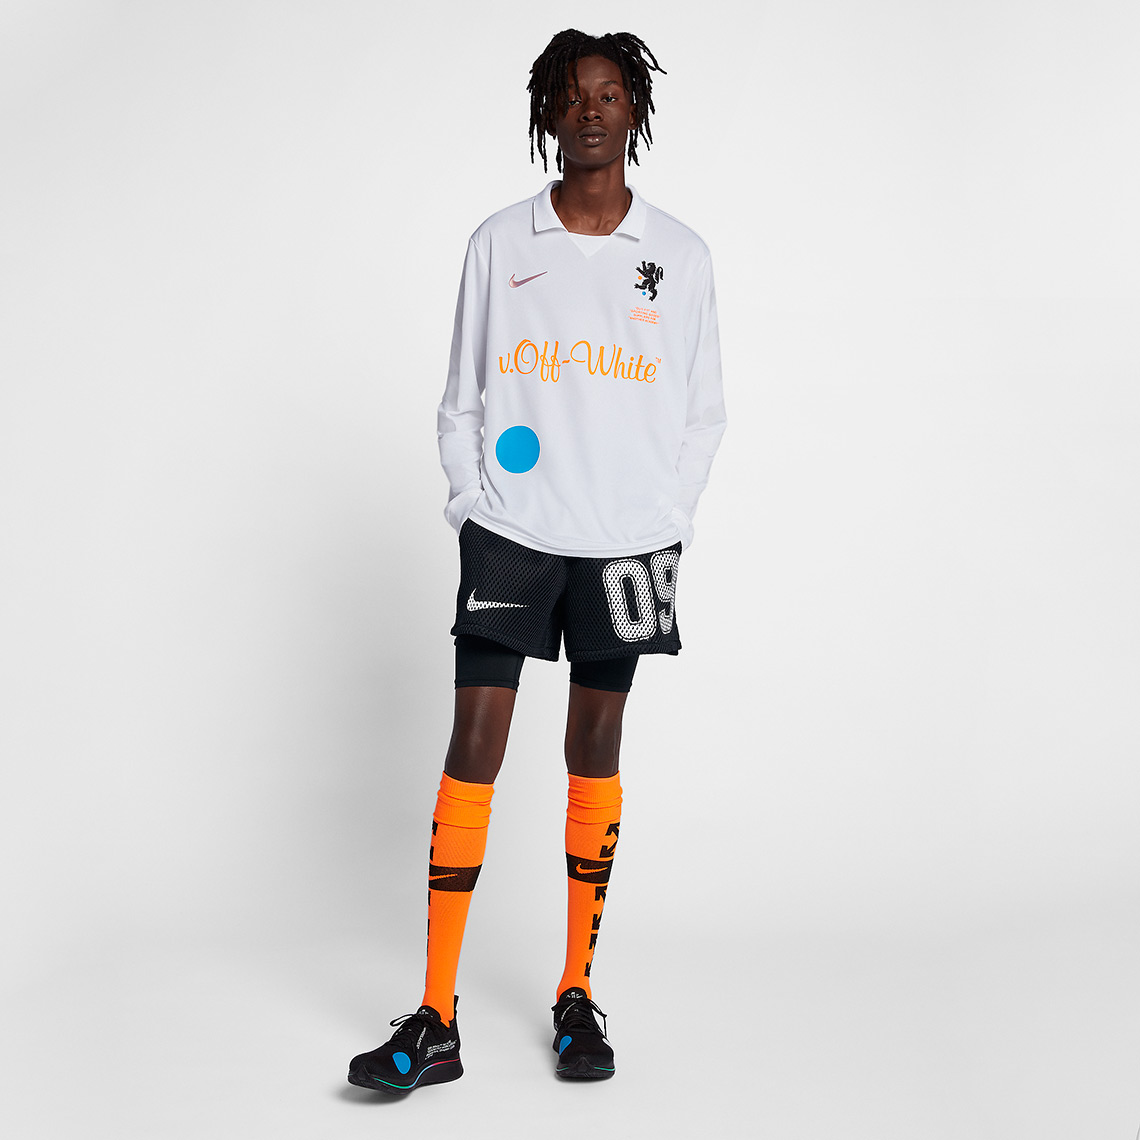 off white soccer jersey